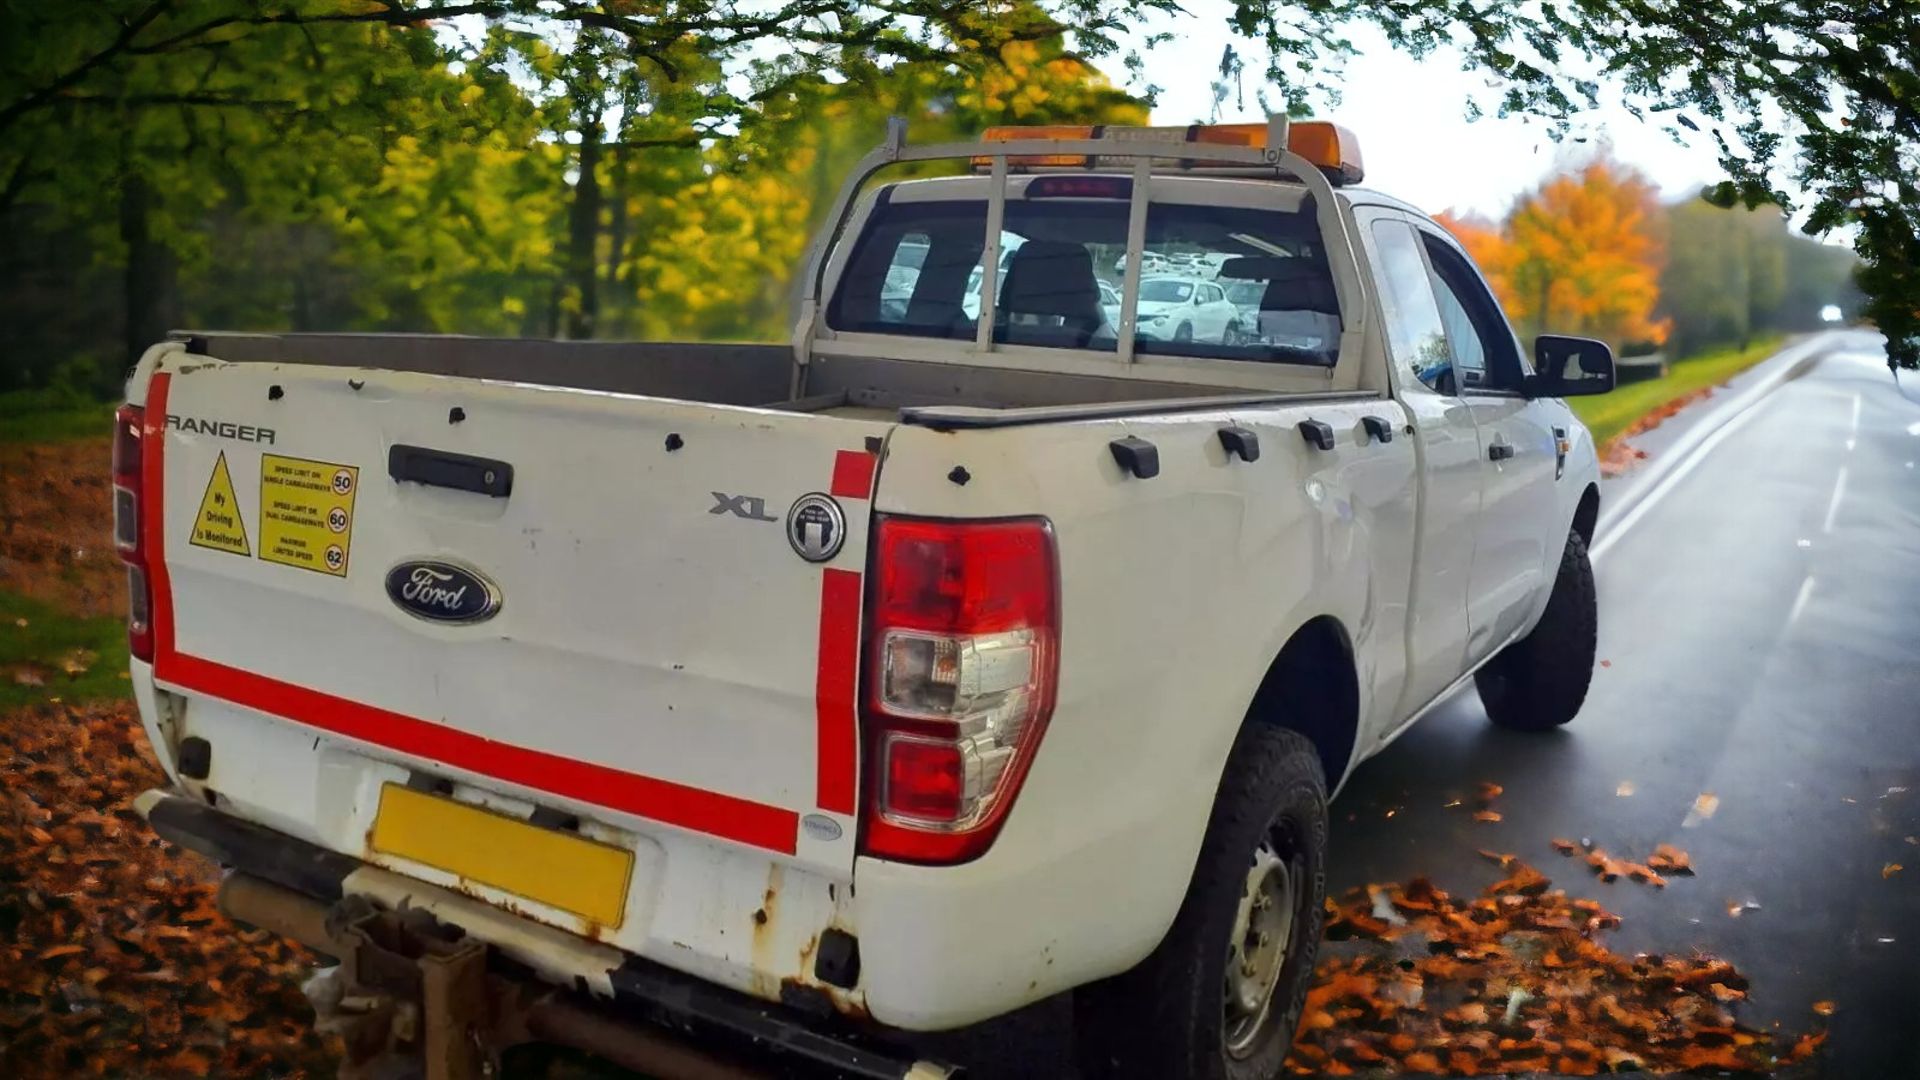 FORD RANGER XL SUPER CAB 4X4 PICKUP: BUILT TOUGH FOR EVERY ADVENTURE - Image 4 of 9